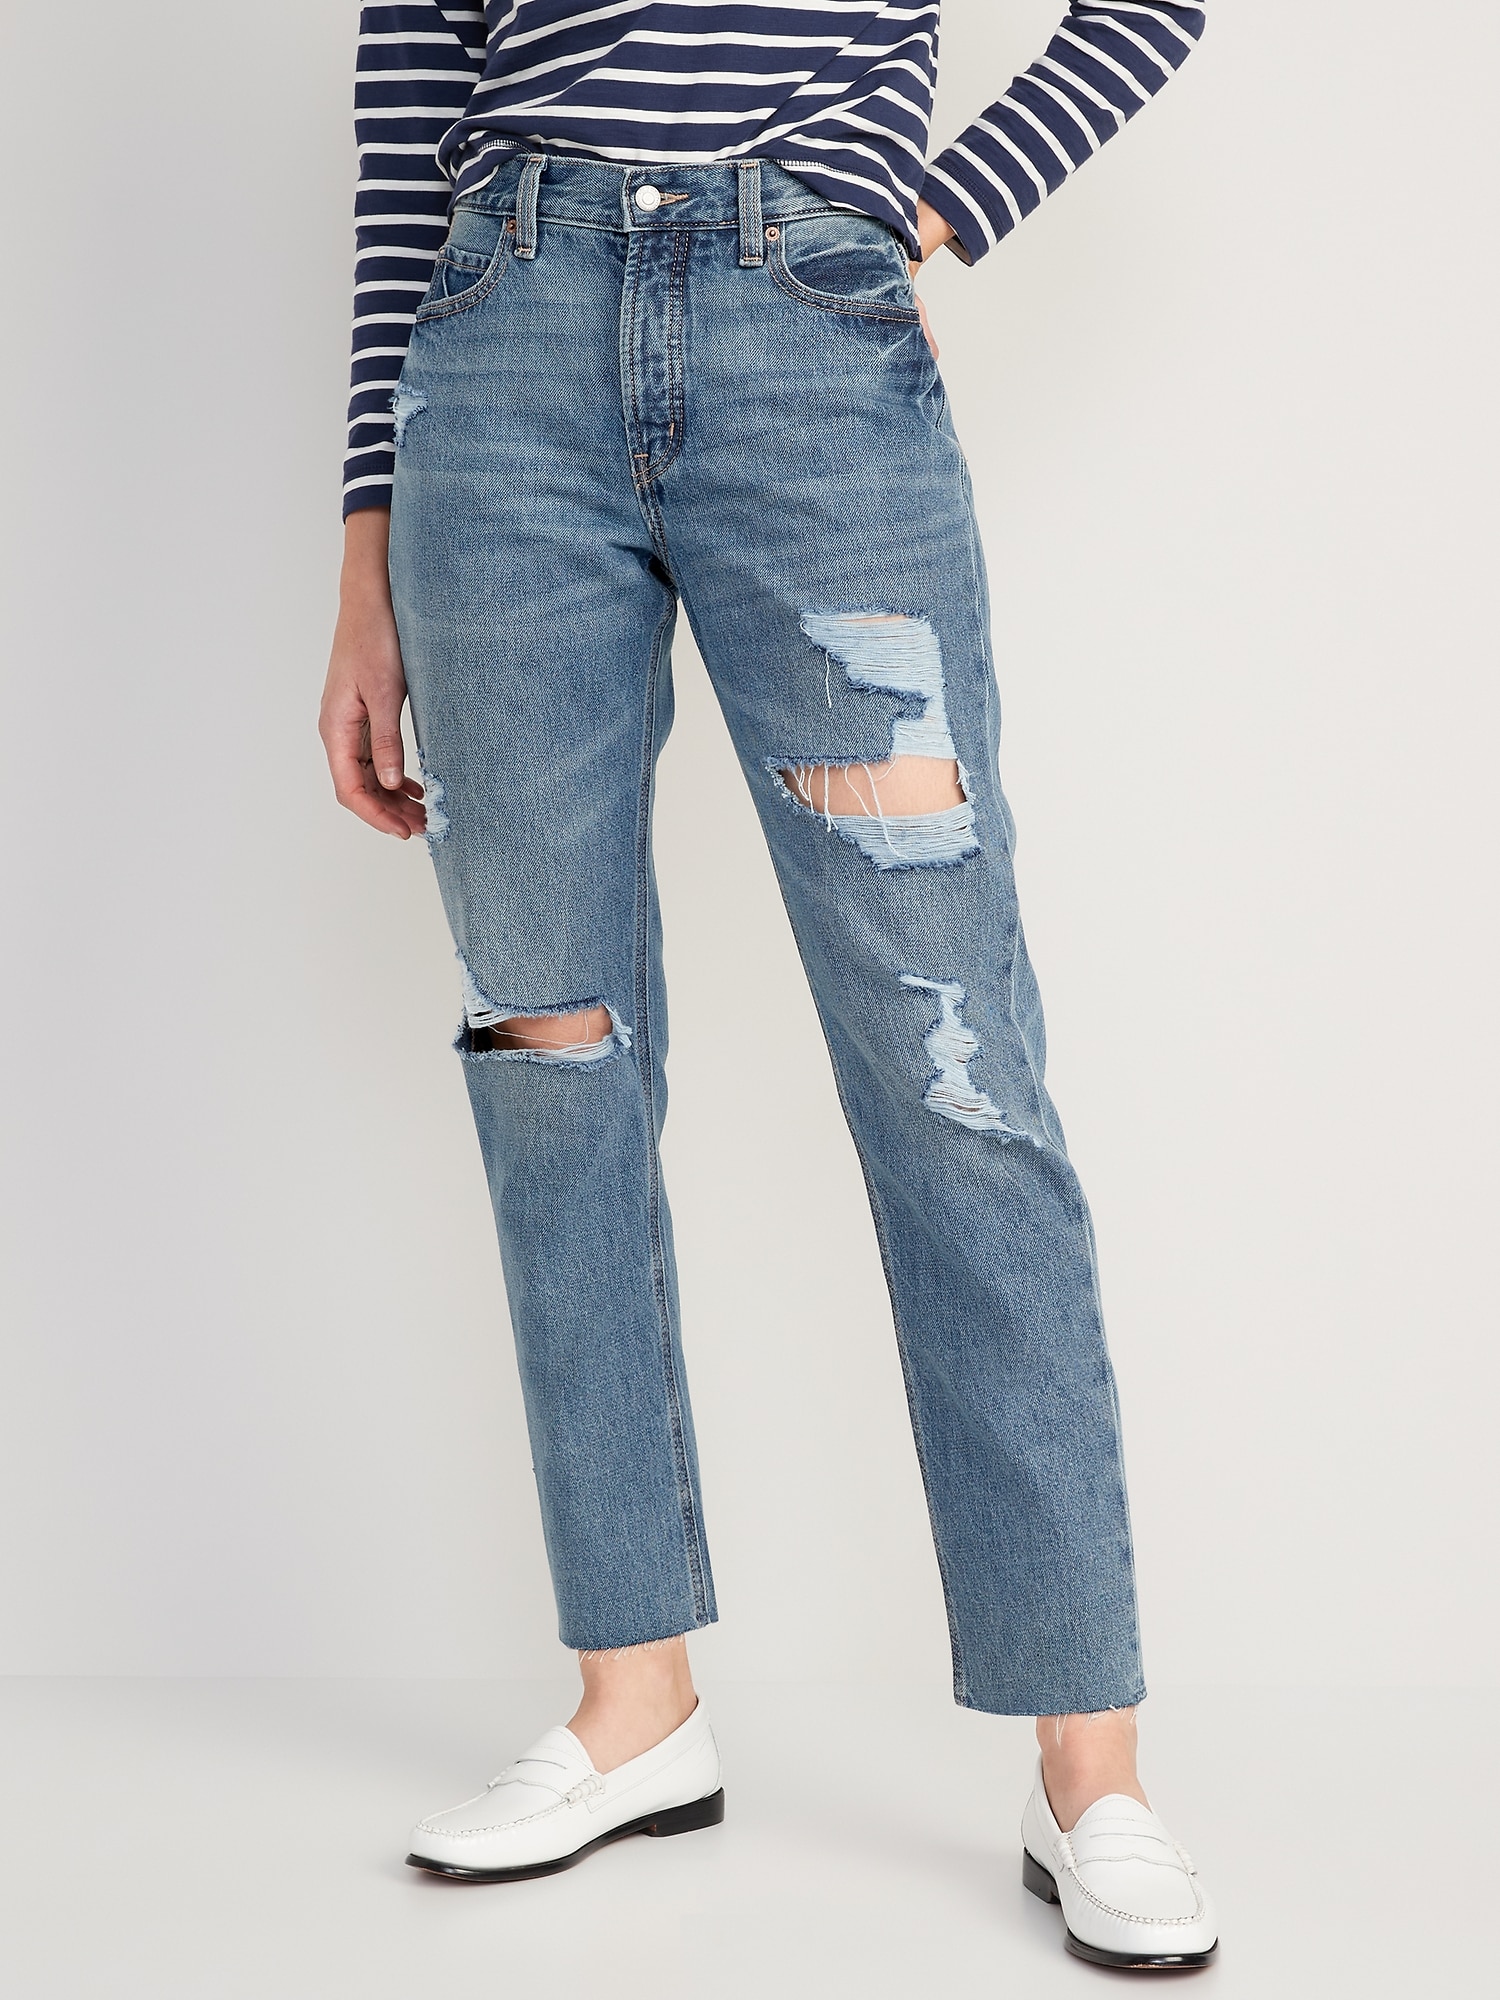 New Look ripped wide leg dad jean in mid blue